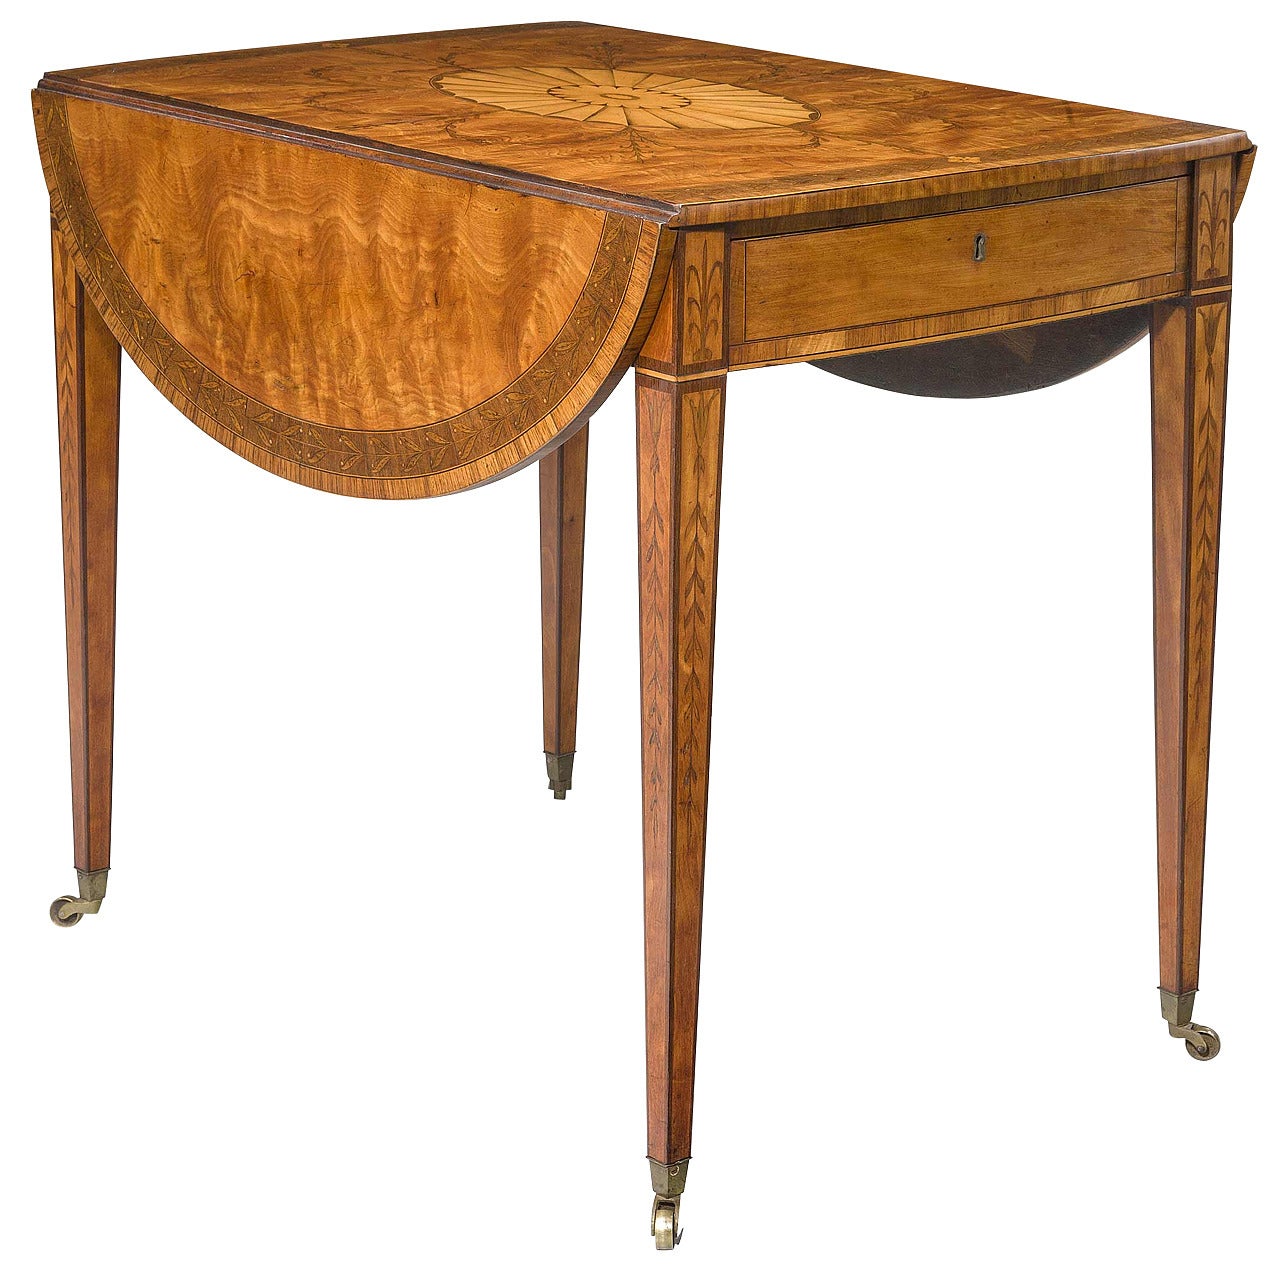 Late 18th Century Satinwood Pembroke Table